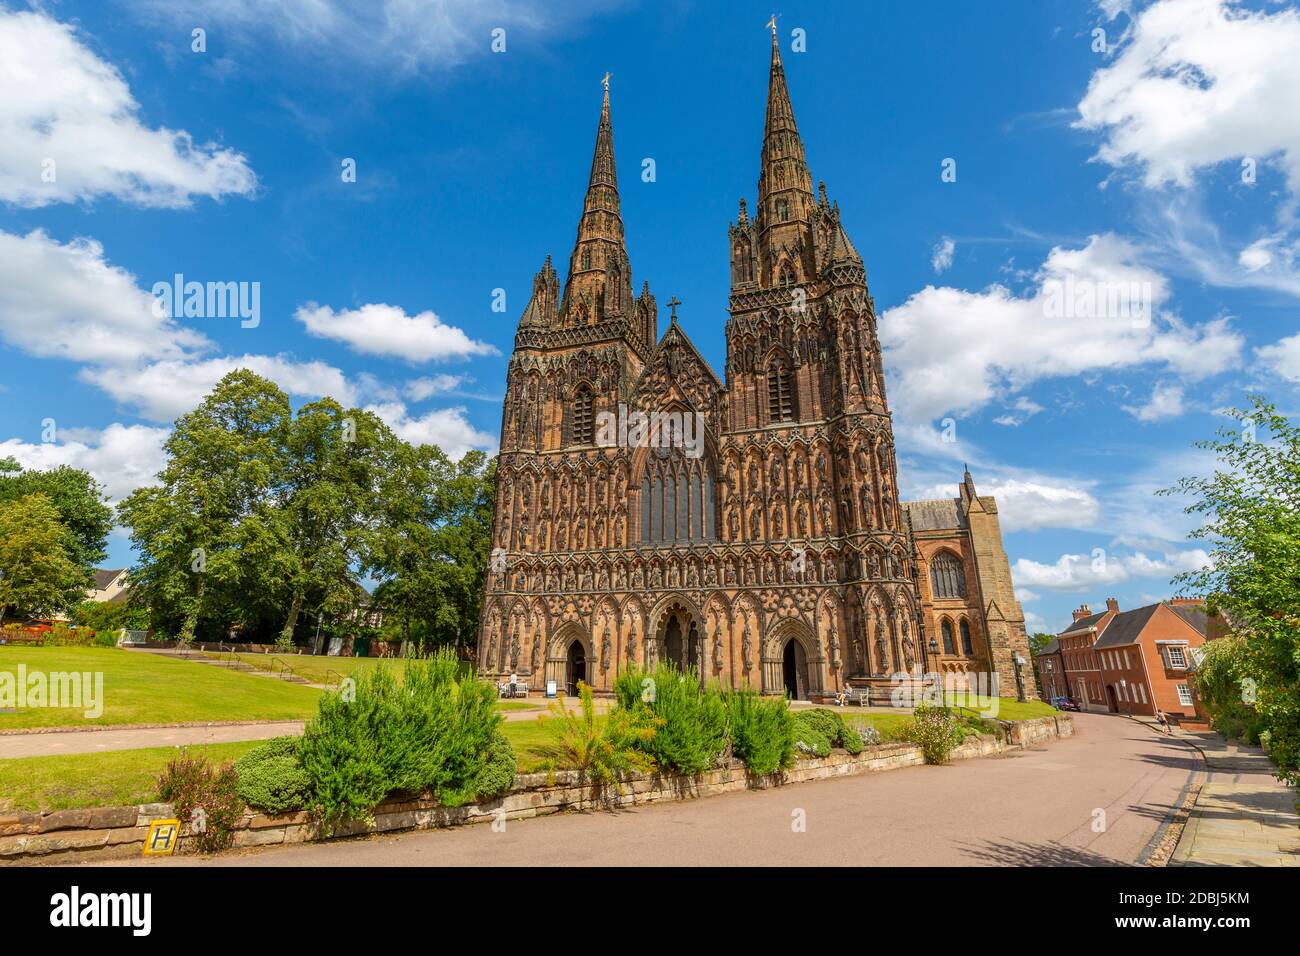 View of Lichfield Cathedral West facade from The Close, Lichfield, Staffordshire, England, United Kingdom, Europe Stock Photo